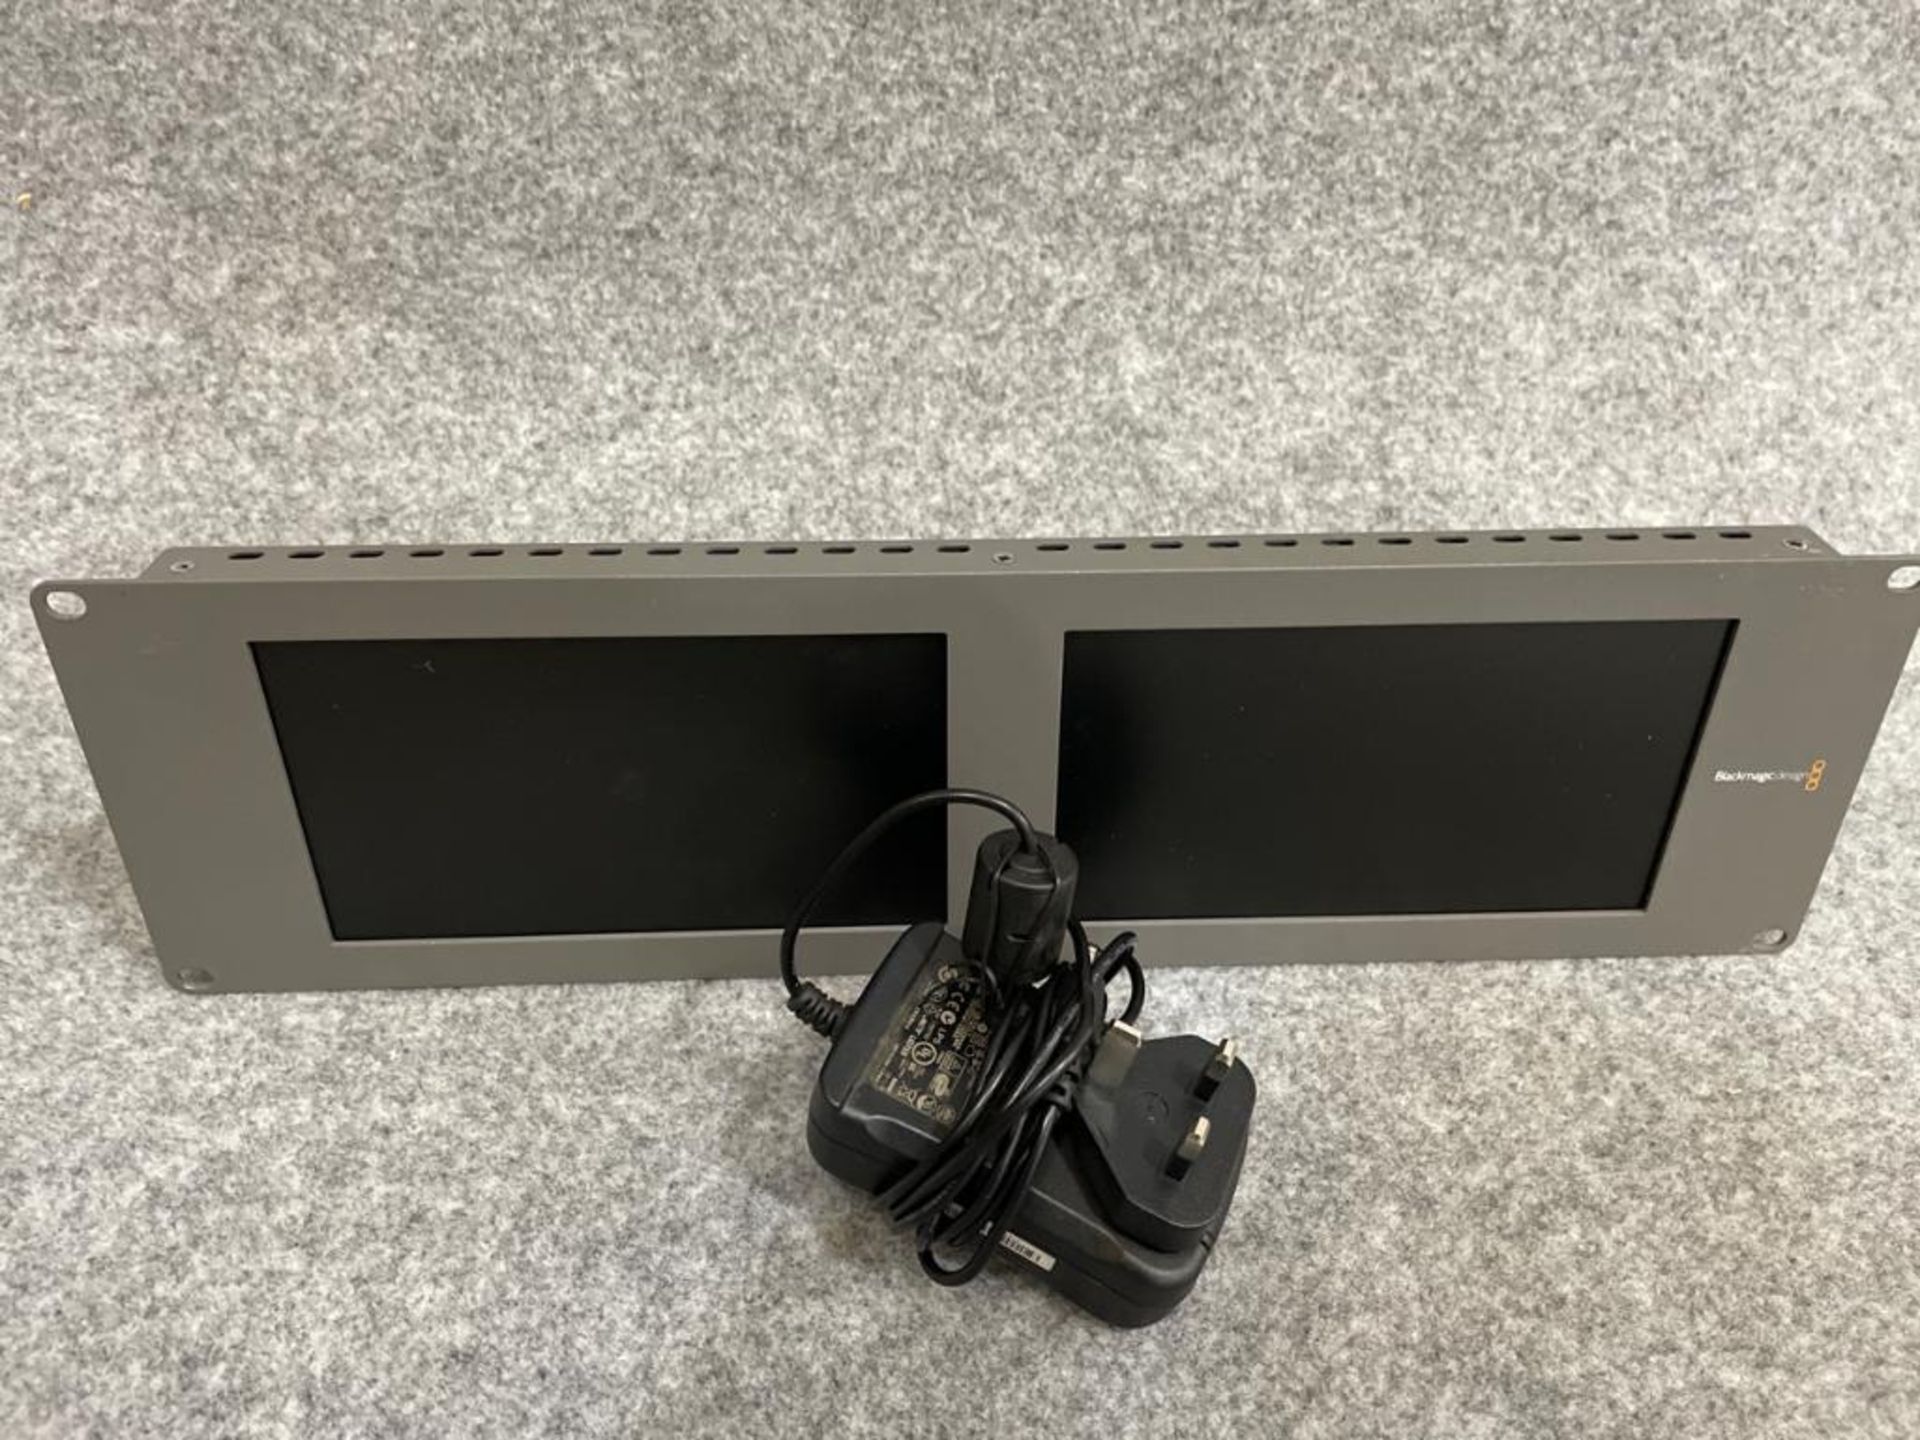 BlackMagic Dual HD Monitor with power supply SN: 1392068 - Image 3 of 3